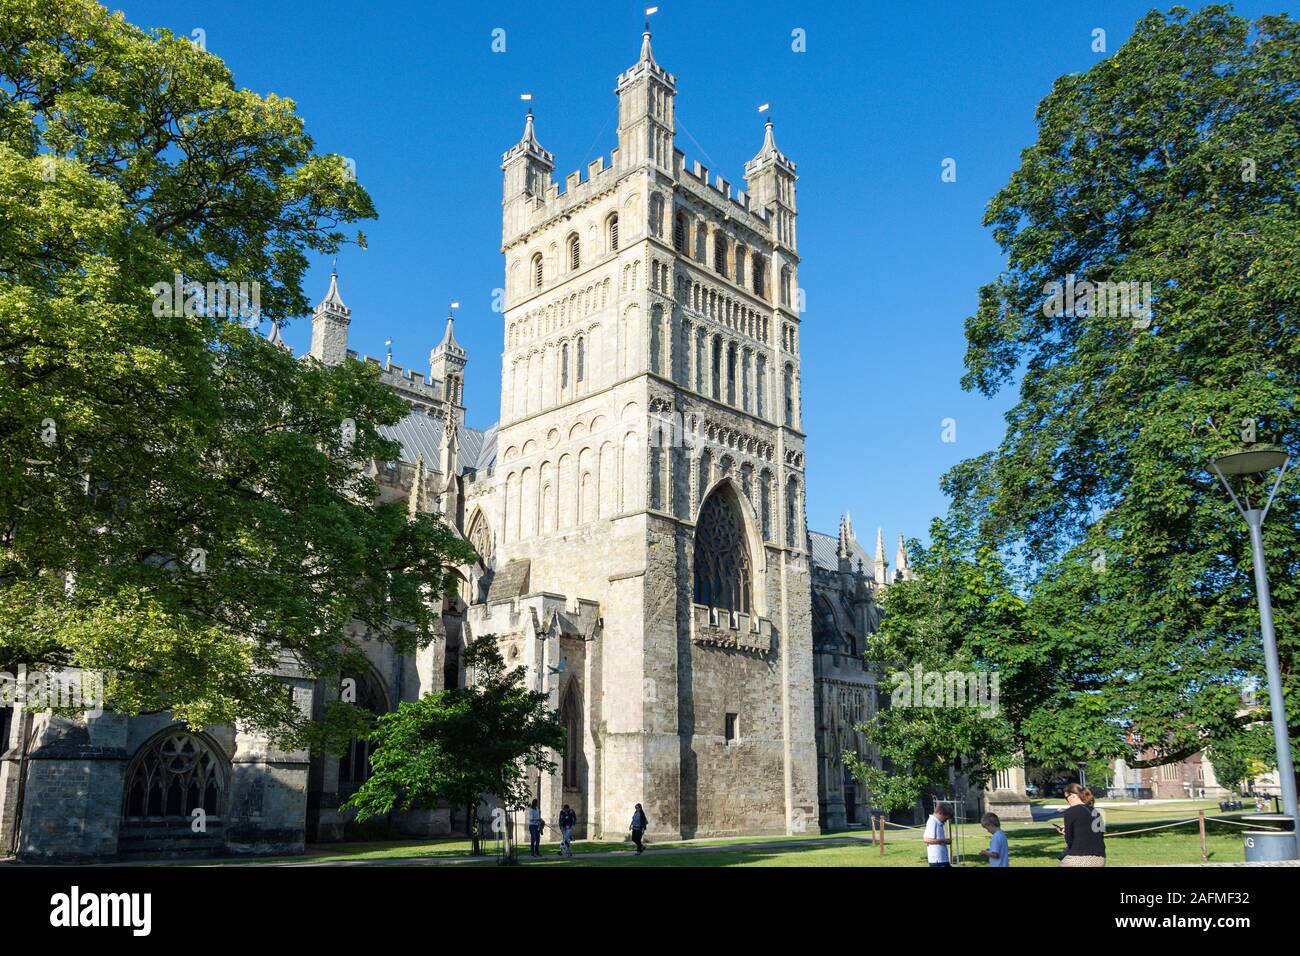 The South Tower, Exeter Cathedral, Exeter, Devon, England, United Kingdom Stock Photo